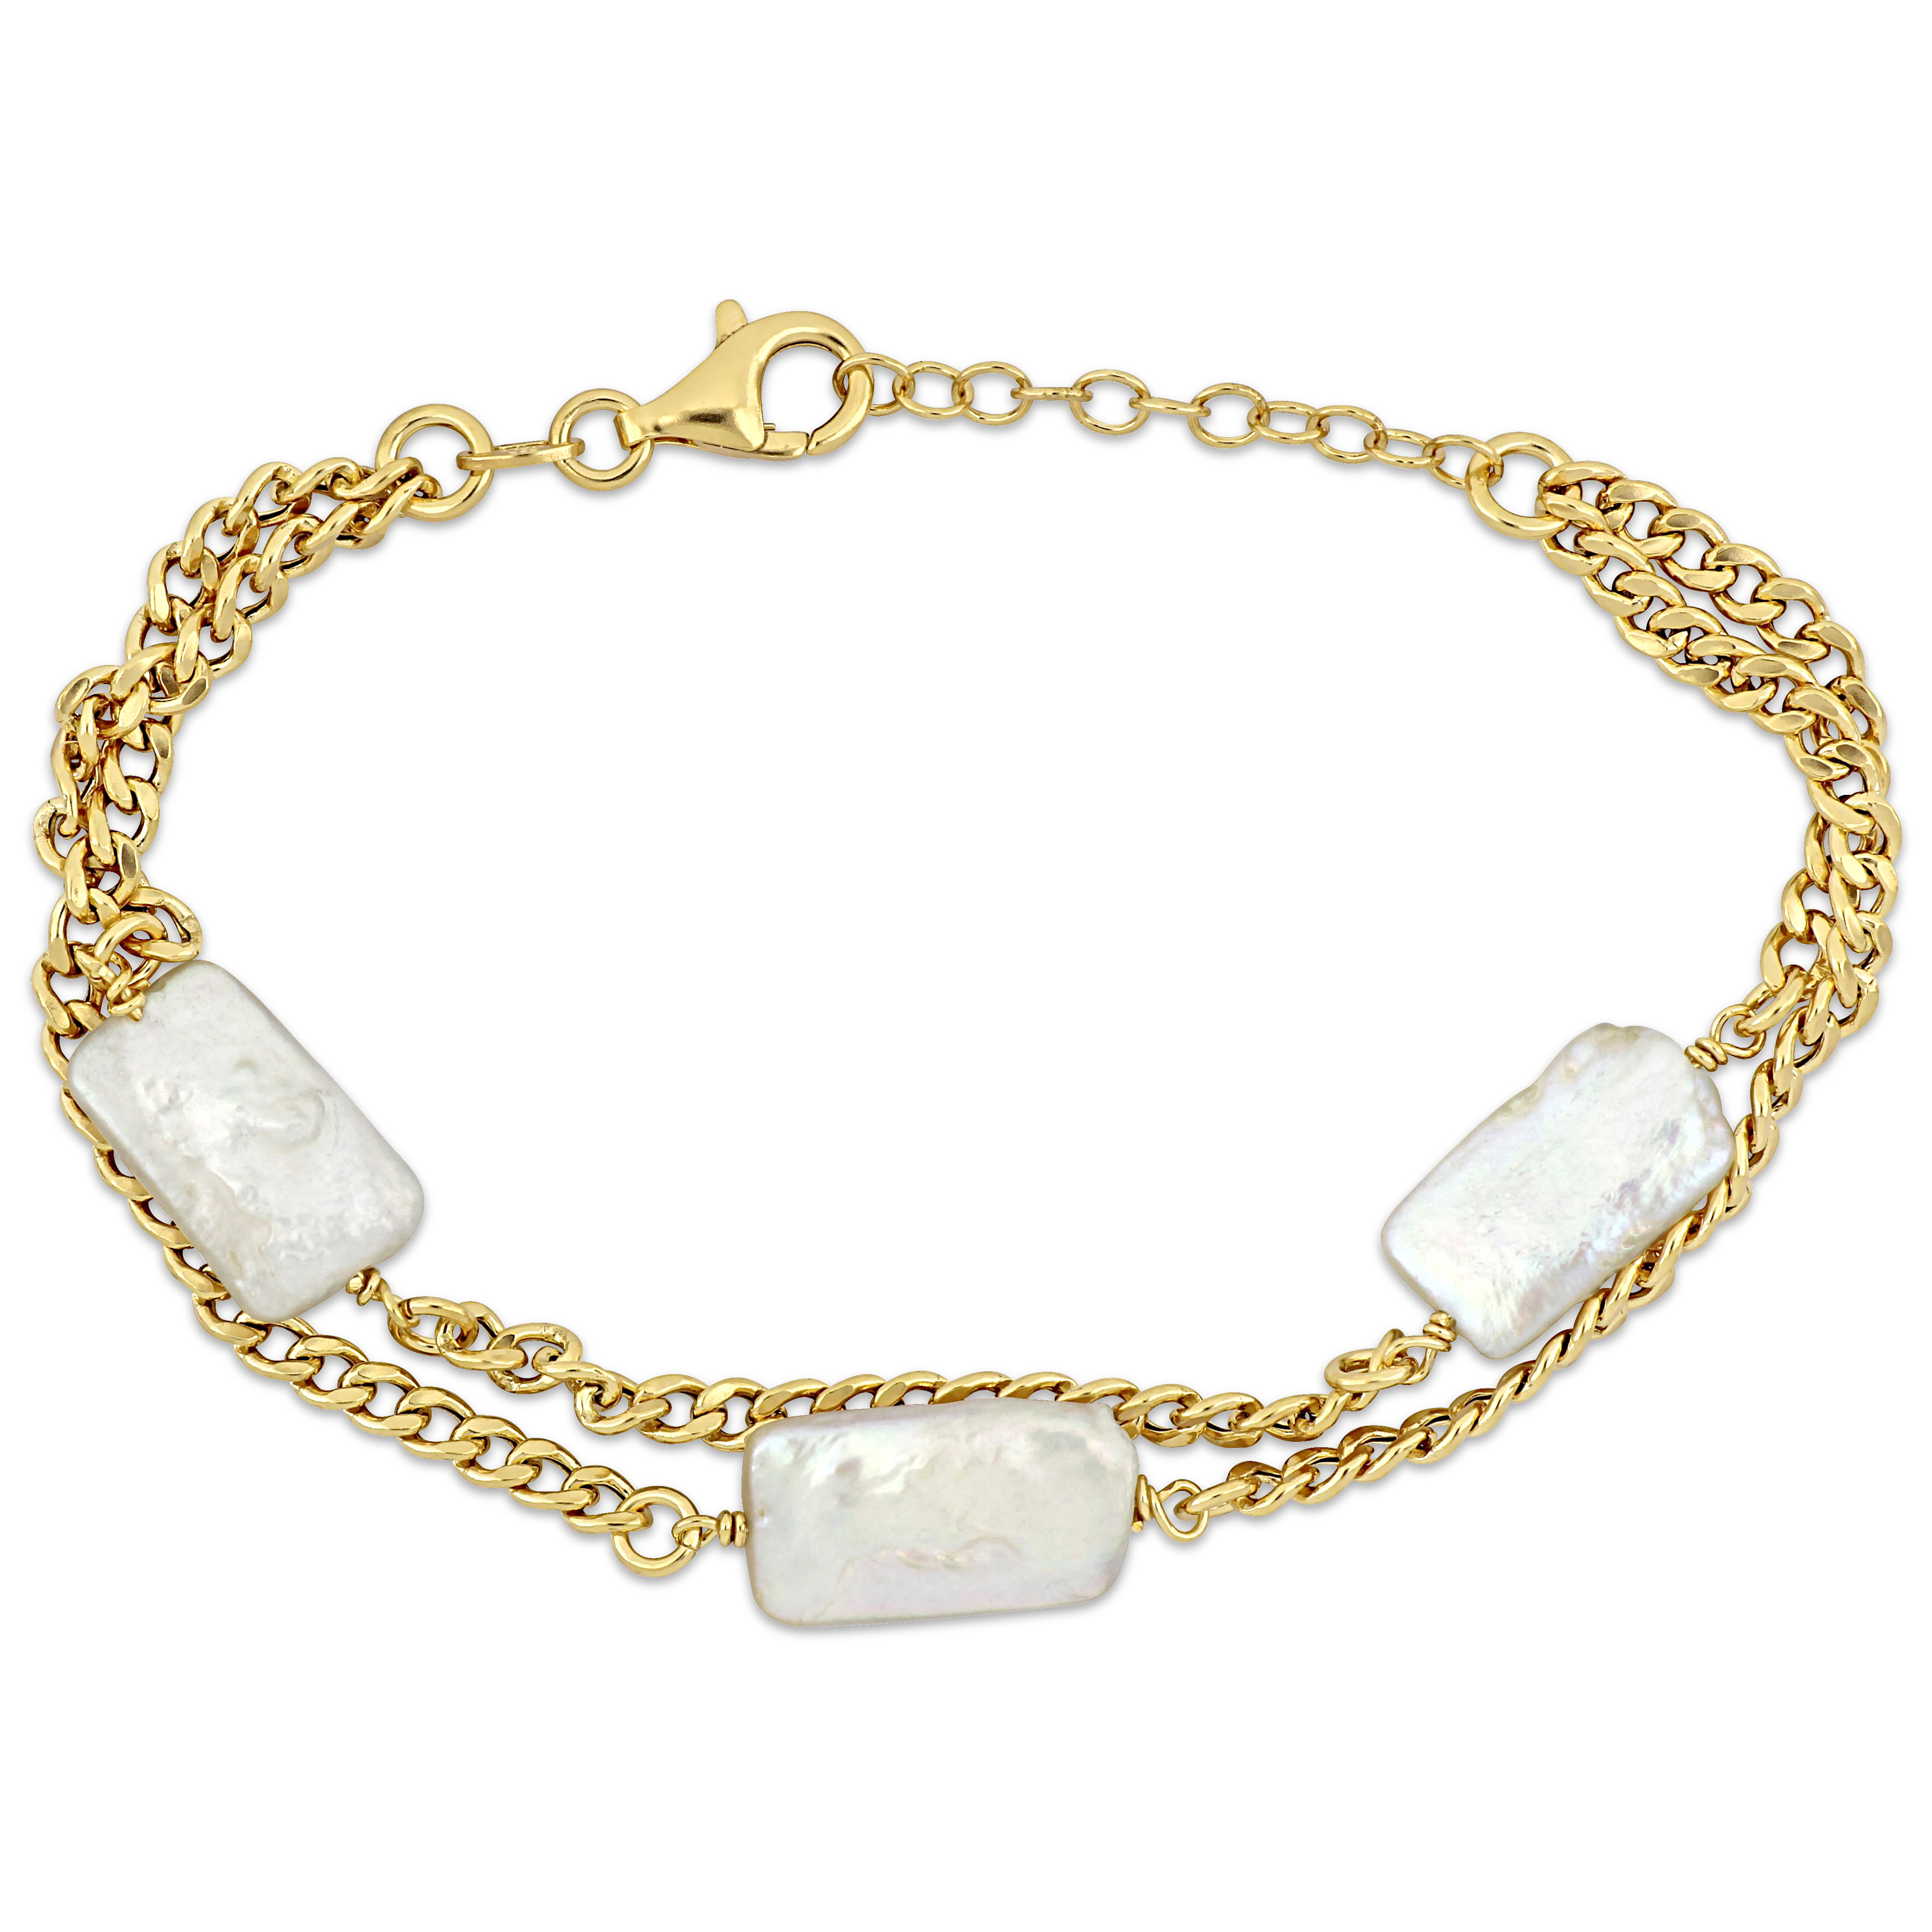 10x15.5mm Cultured Freshwater Rectangular Pearl Double Row Bracelet with Curb Chain in Yellow Plated Sterling Silver